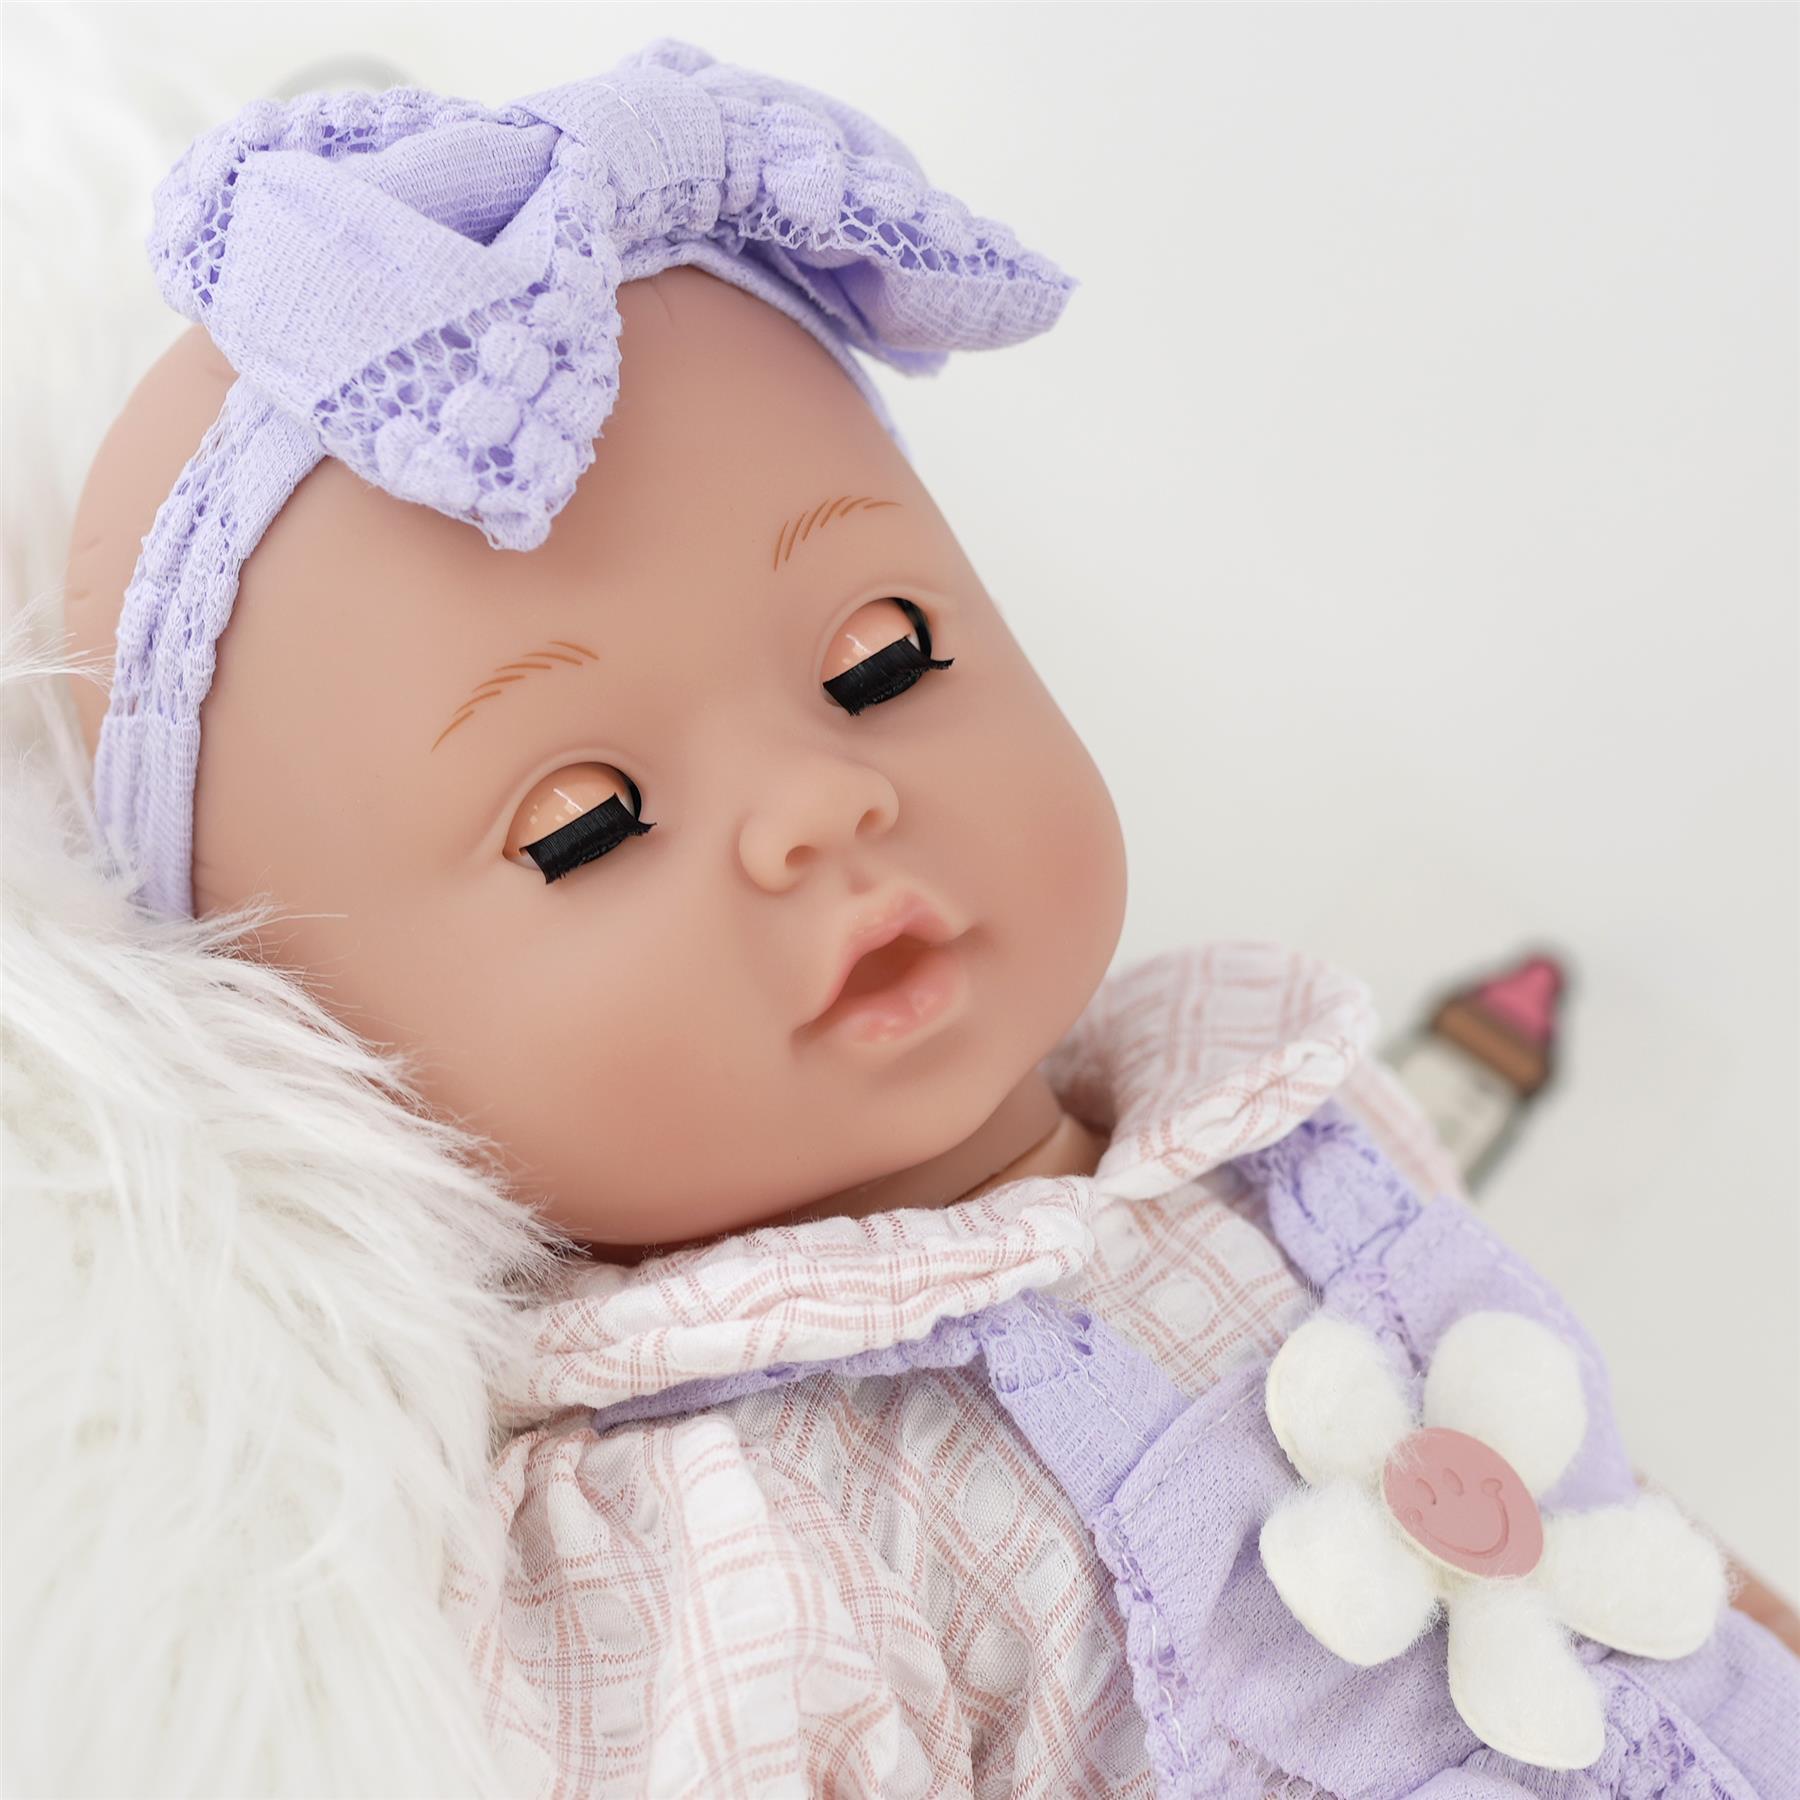 16" Baby Doll with Accessories by BiBi Doll - The Magic Toy Shop